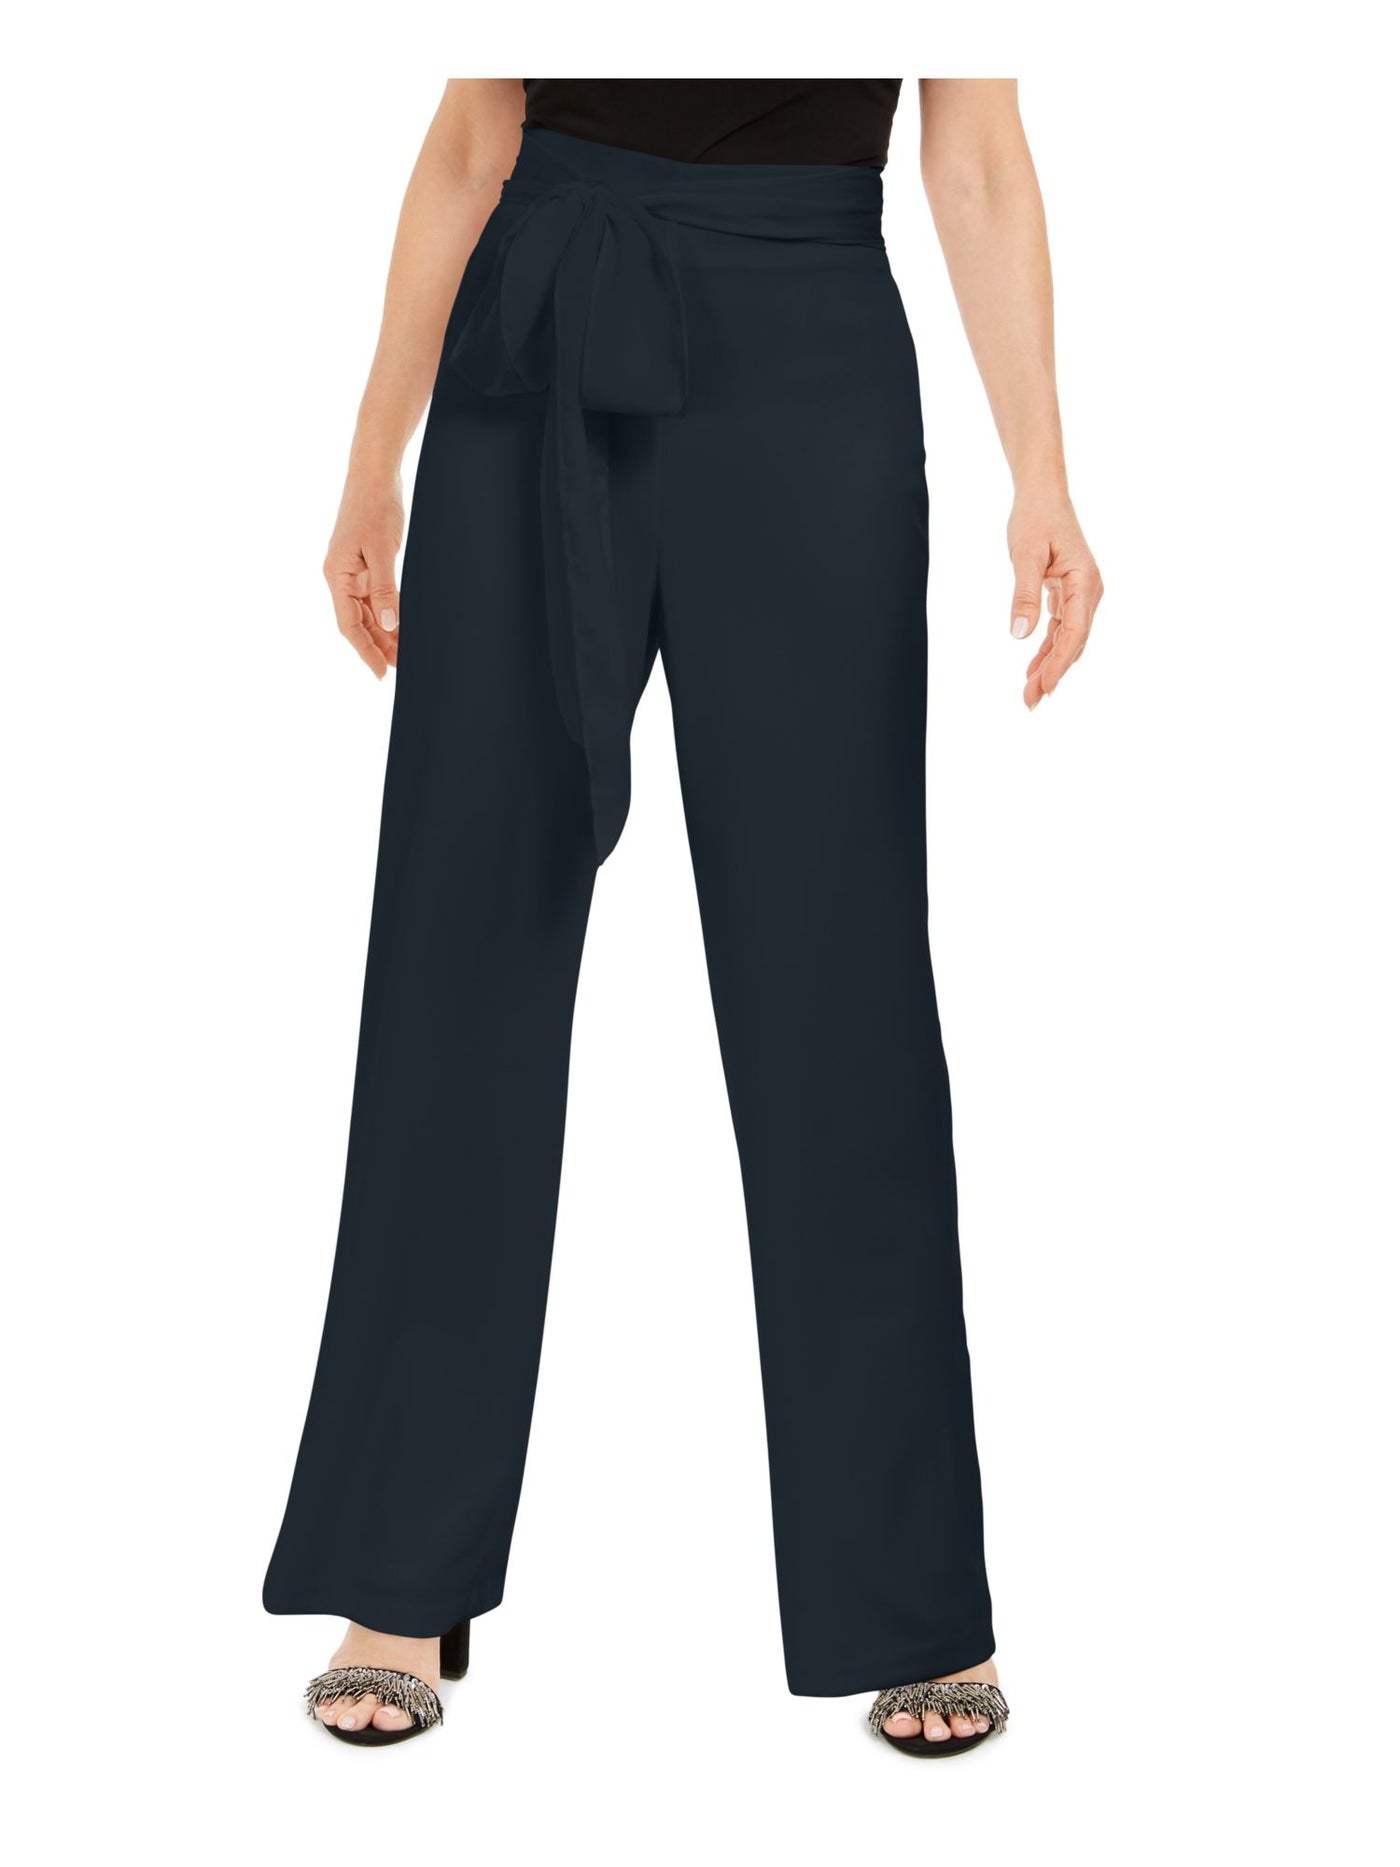 ADRIANNA PAPELL Womens Navy Belted Zippered Wear To Work Wide Leg Pants 12